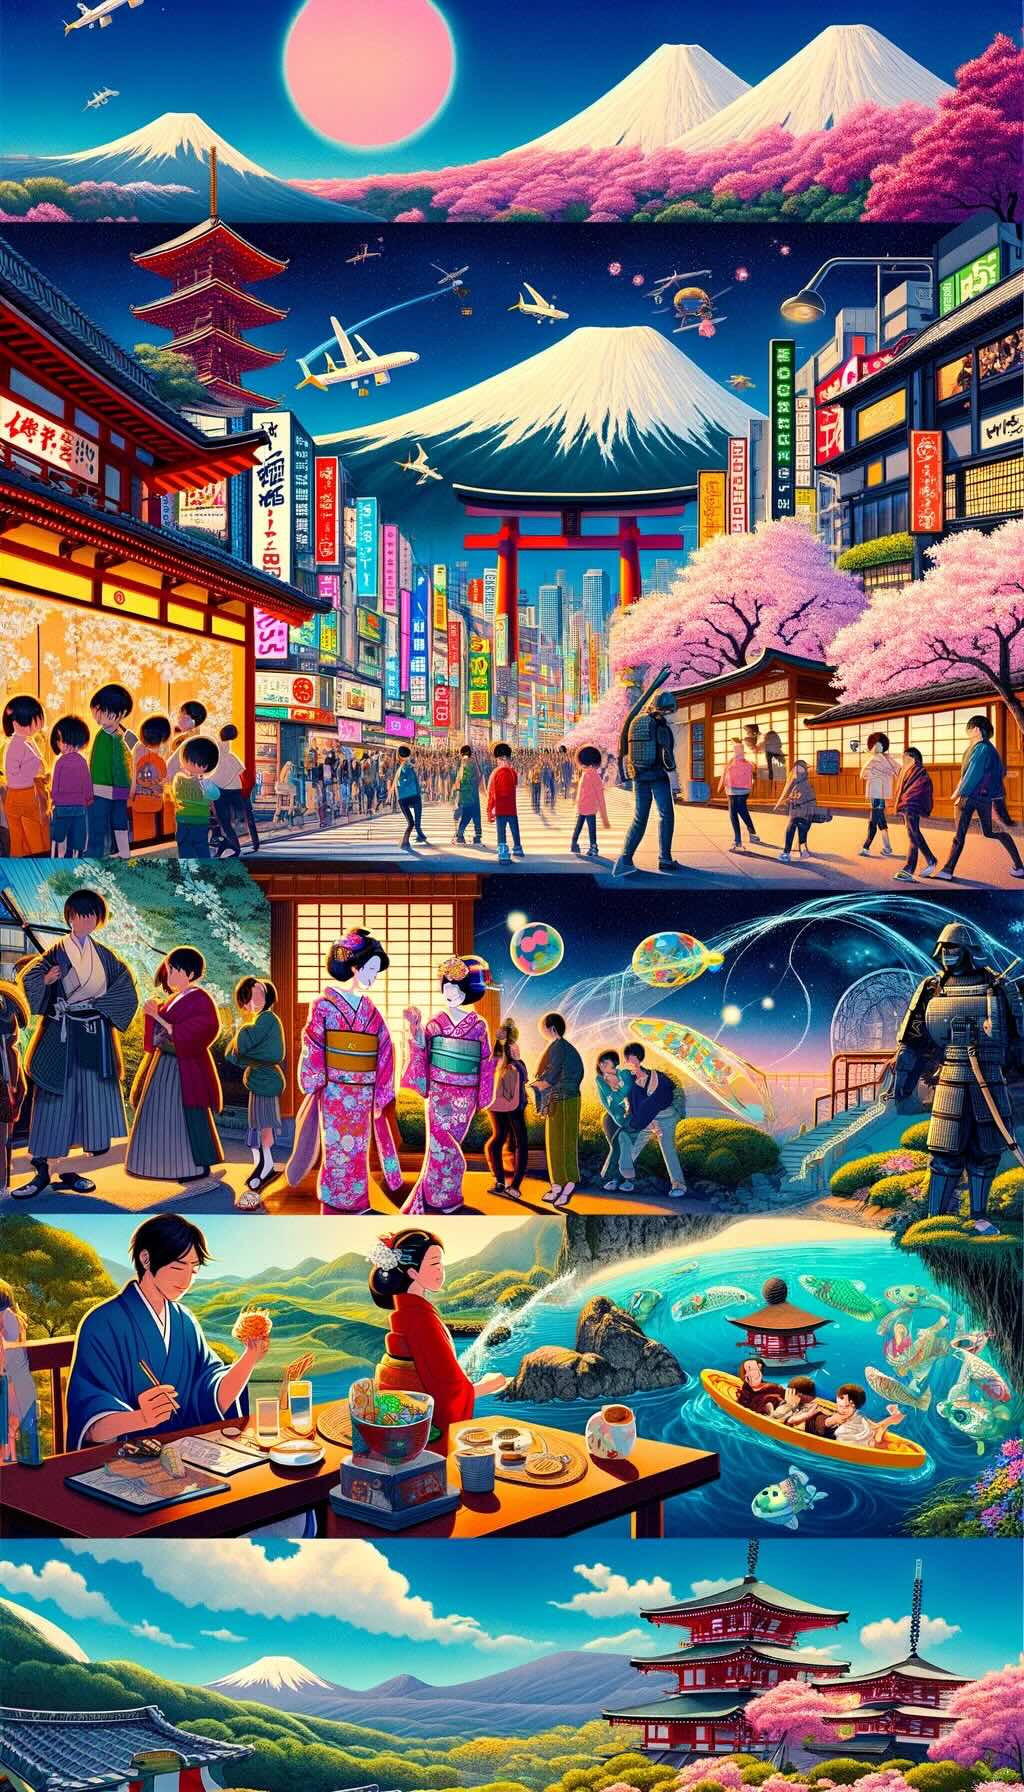 Diverse range of family-oriented activities available in Japan, from the vibrant streets of Tokyo to the tranquil beauty of Kyoto, and adventurous landscapes such as Mount Fuji and Okinawa's underwater caves. The scene is filled with life and color, reflecting the joy and variety of experiences that await visitors in Japan